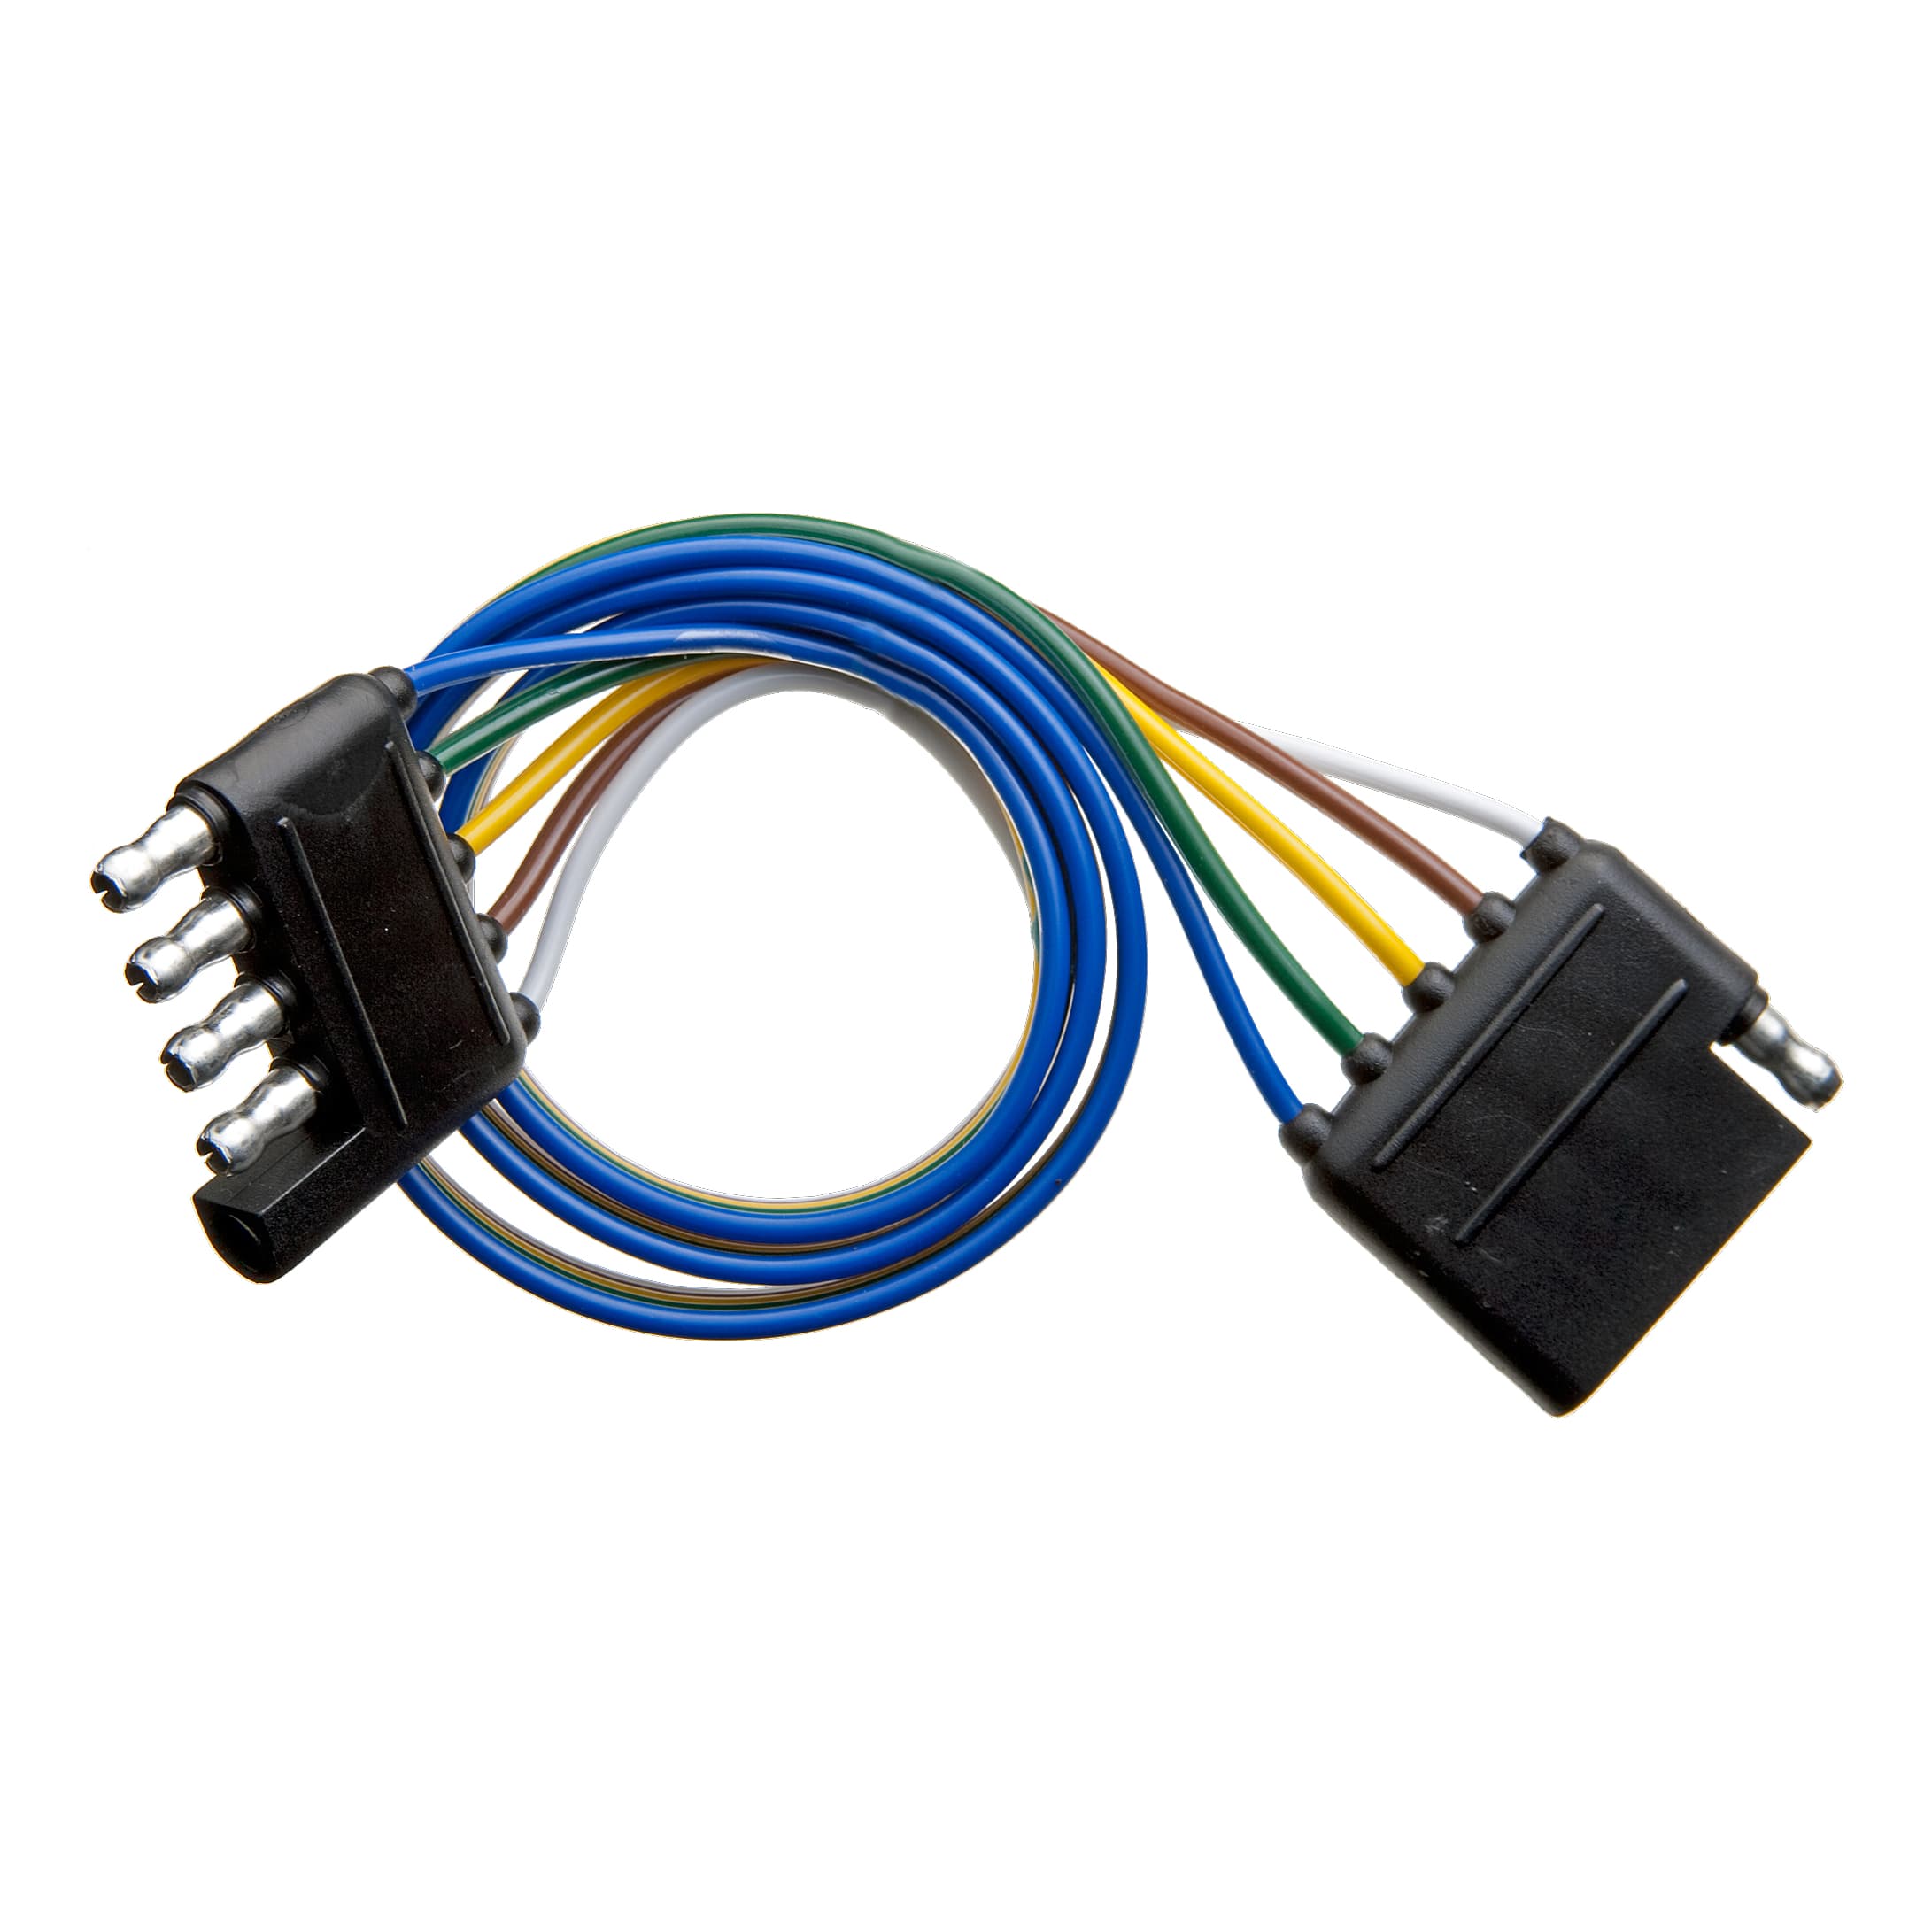 Bass Pro Shops® Trailer Wire Male/Female Connector - 5-Way